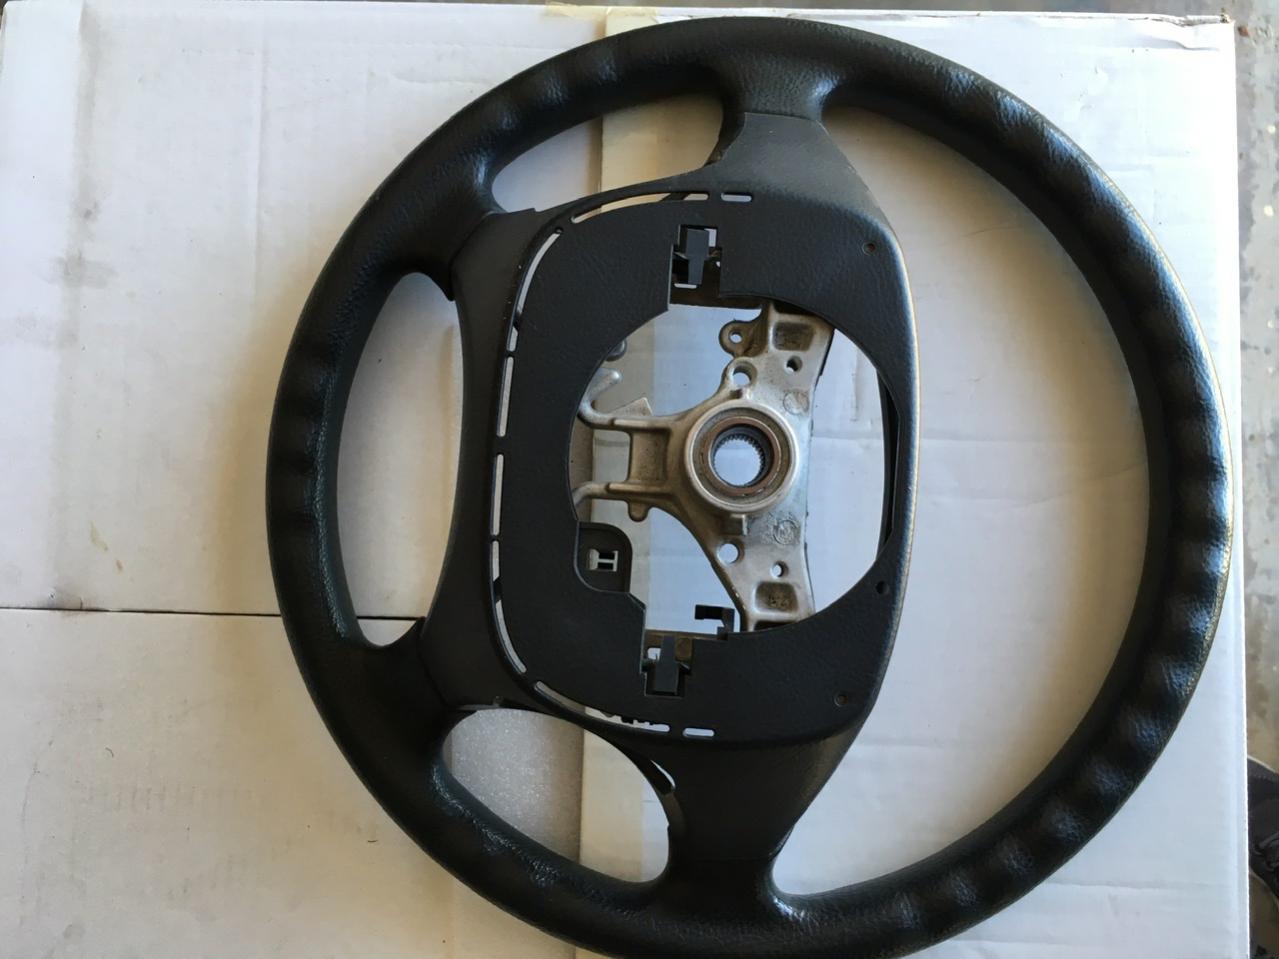 Steering wheel and other hard to find parts-2948a554-c713-44fa-bfeb-452031beb593-jpg